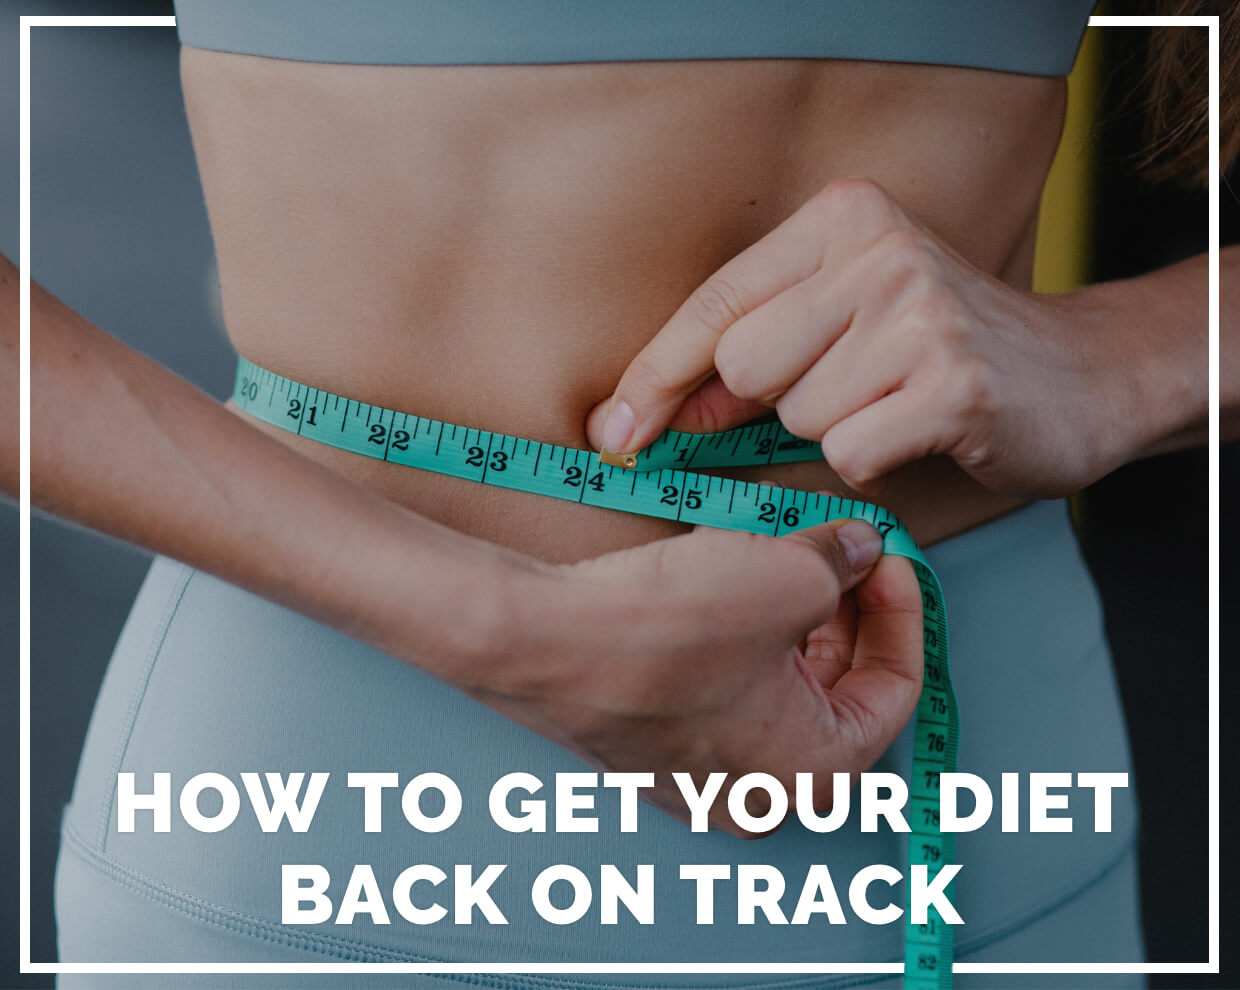 12 ways to get your diet back on track - BHF